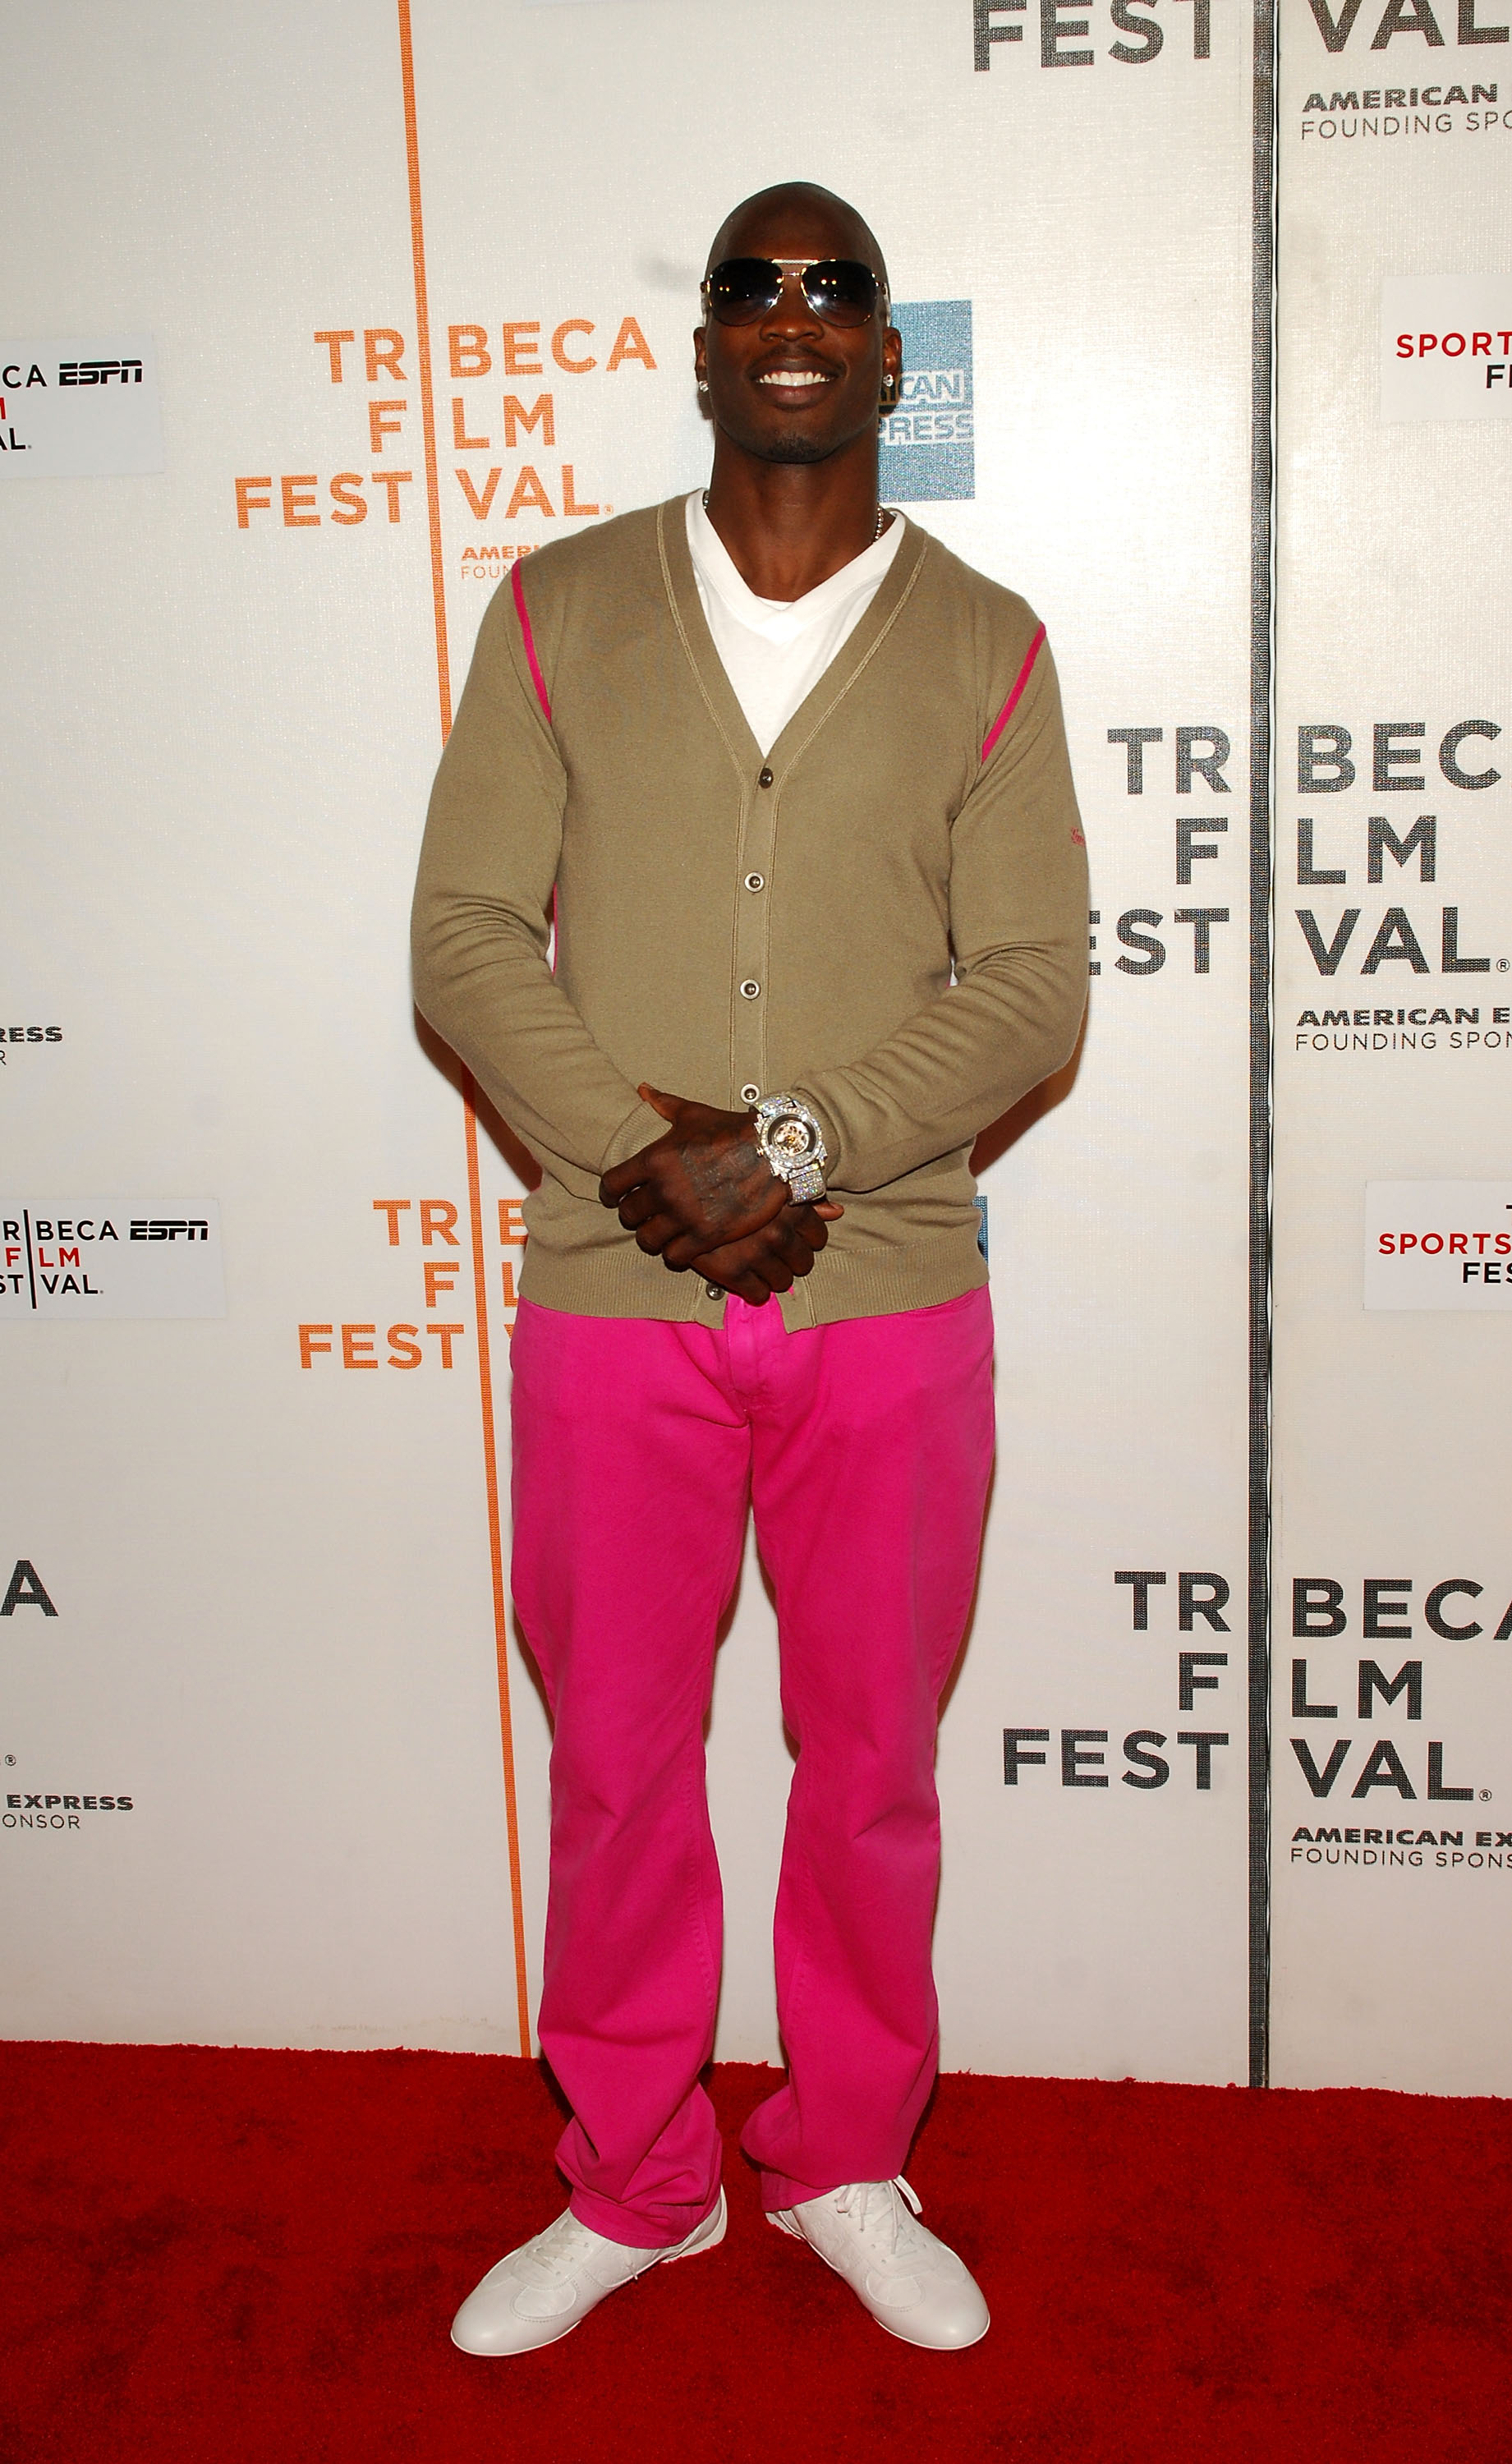 NEW YORK - APRIL 25: Professional football player Chad Ocho Cinco attends a screening of  'Kobe Doin' Work' during the 2009 Tribeca Film Festival at BMCC Tribeca Performing Arts Center on April 25, 2009 in New York City.  (Photo by Rob Loud/Getty Images f